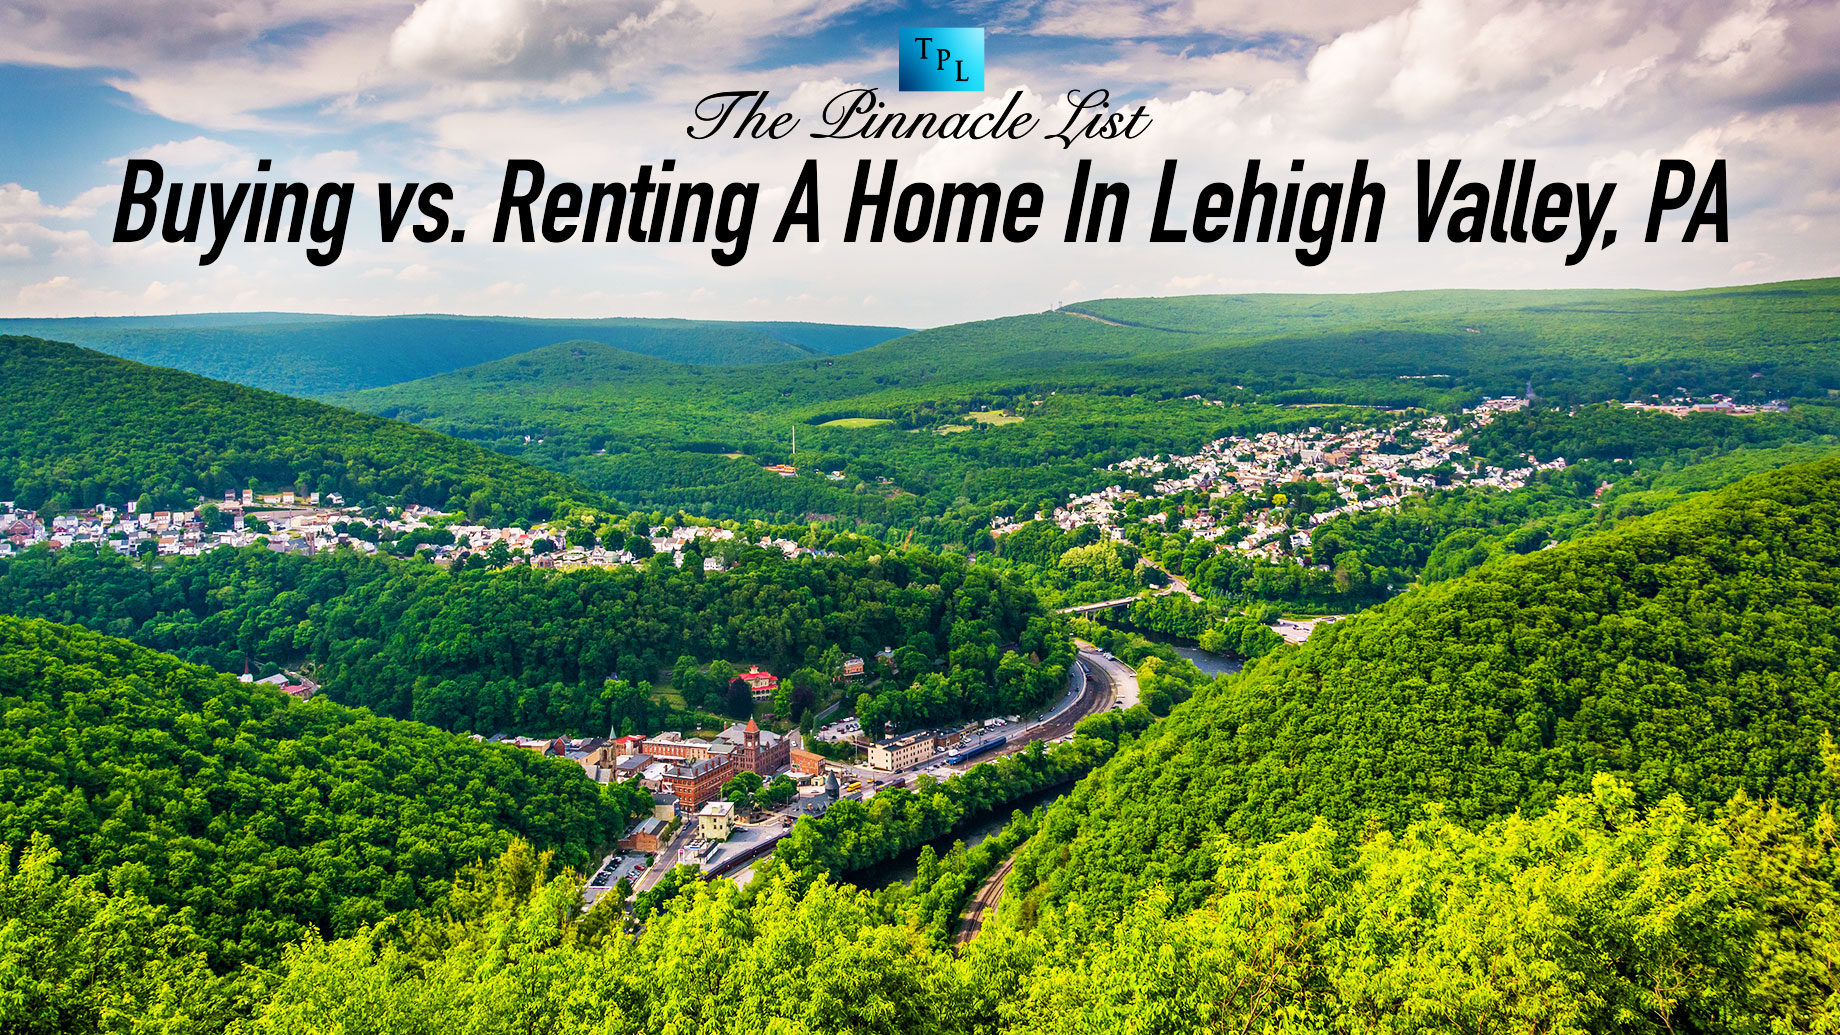 Buying vs. Renting A Home In Lehigh Valley, PA